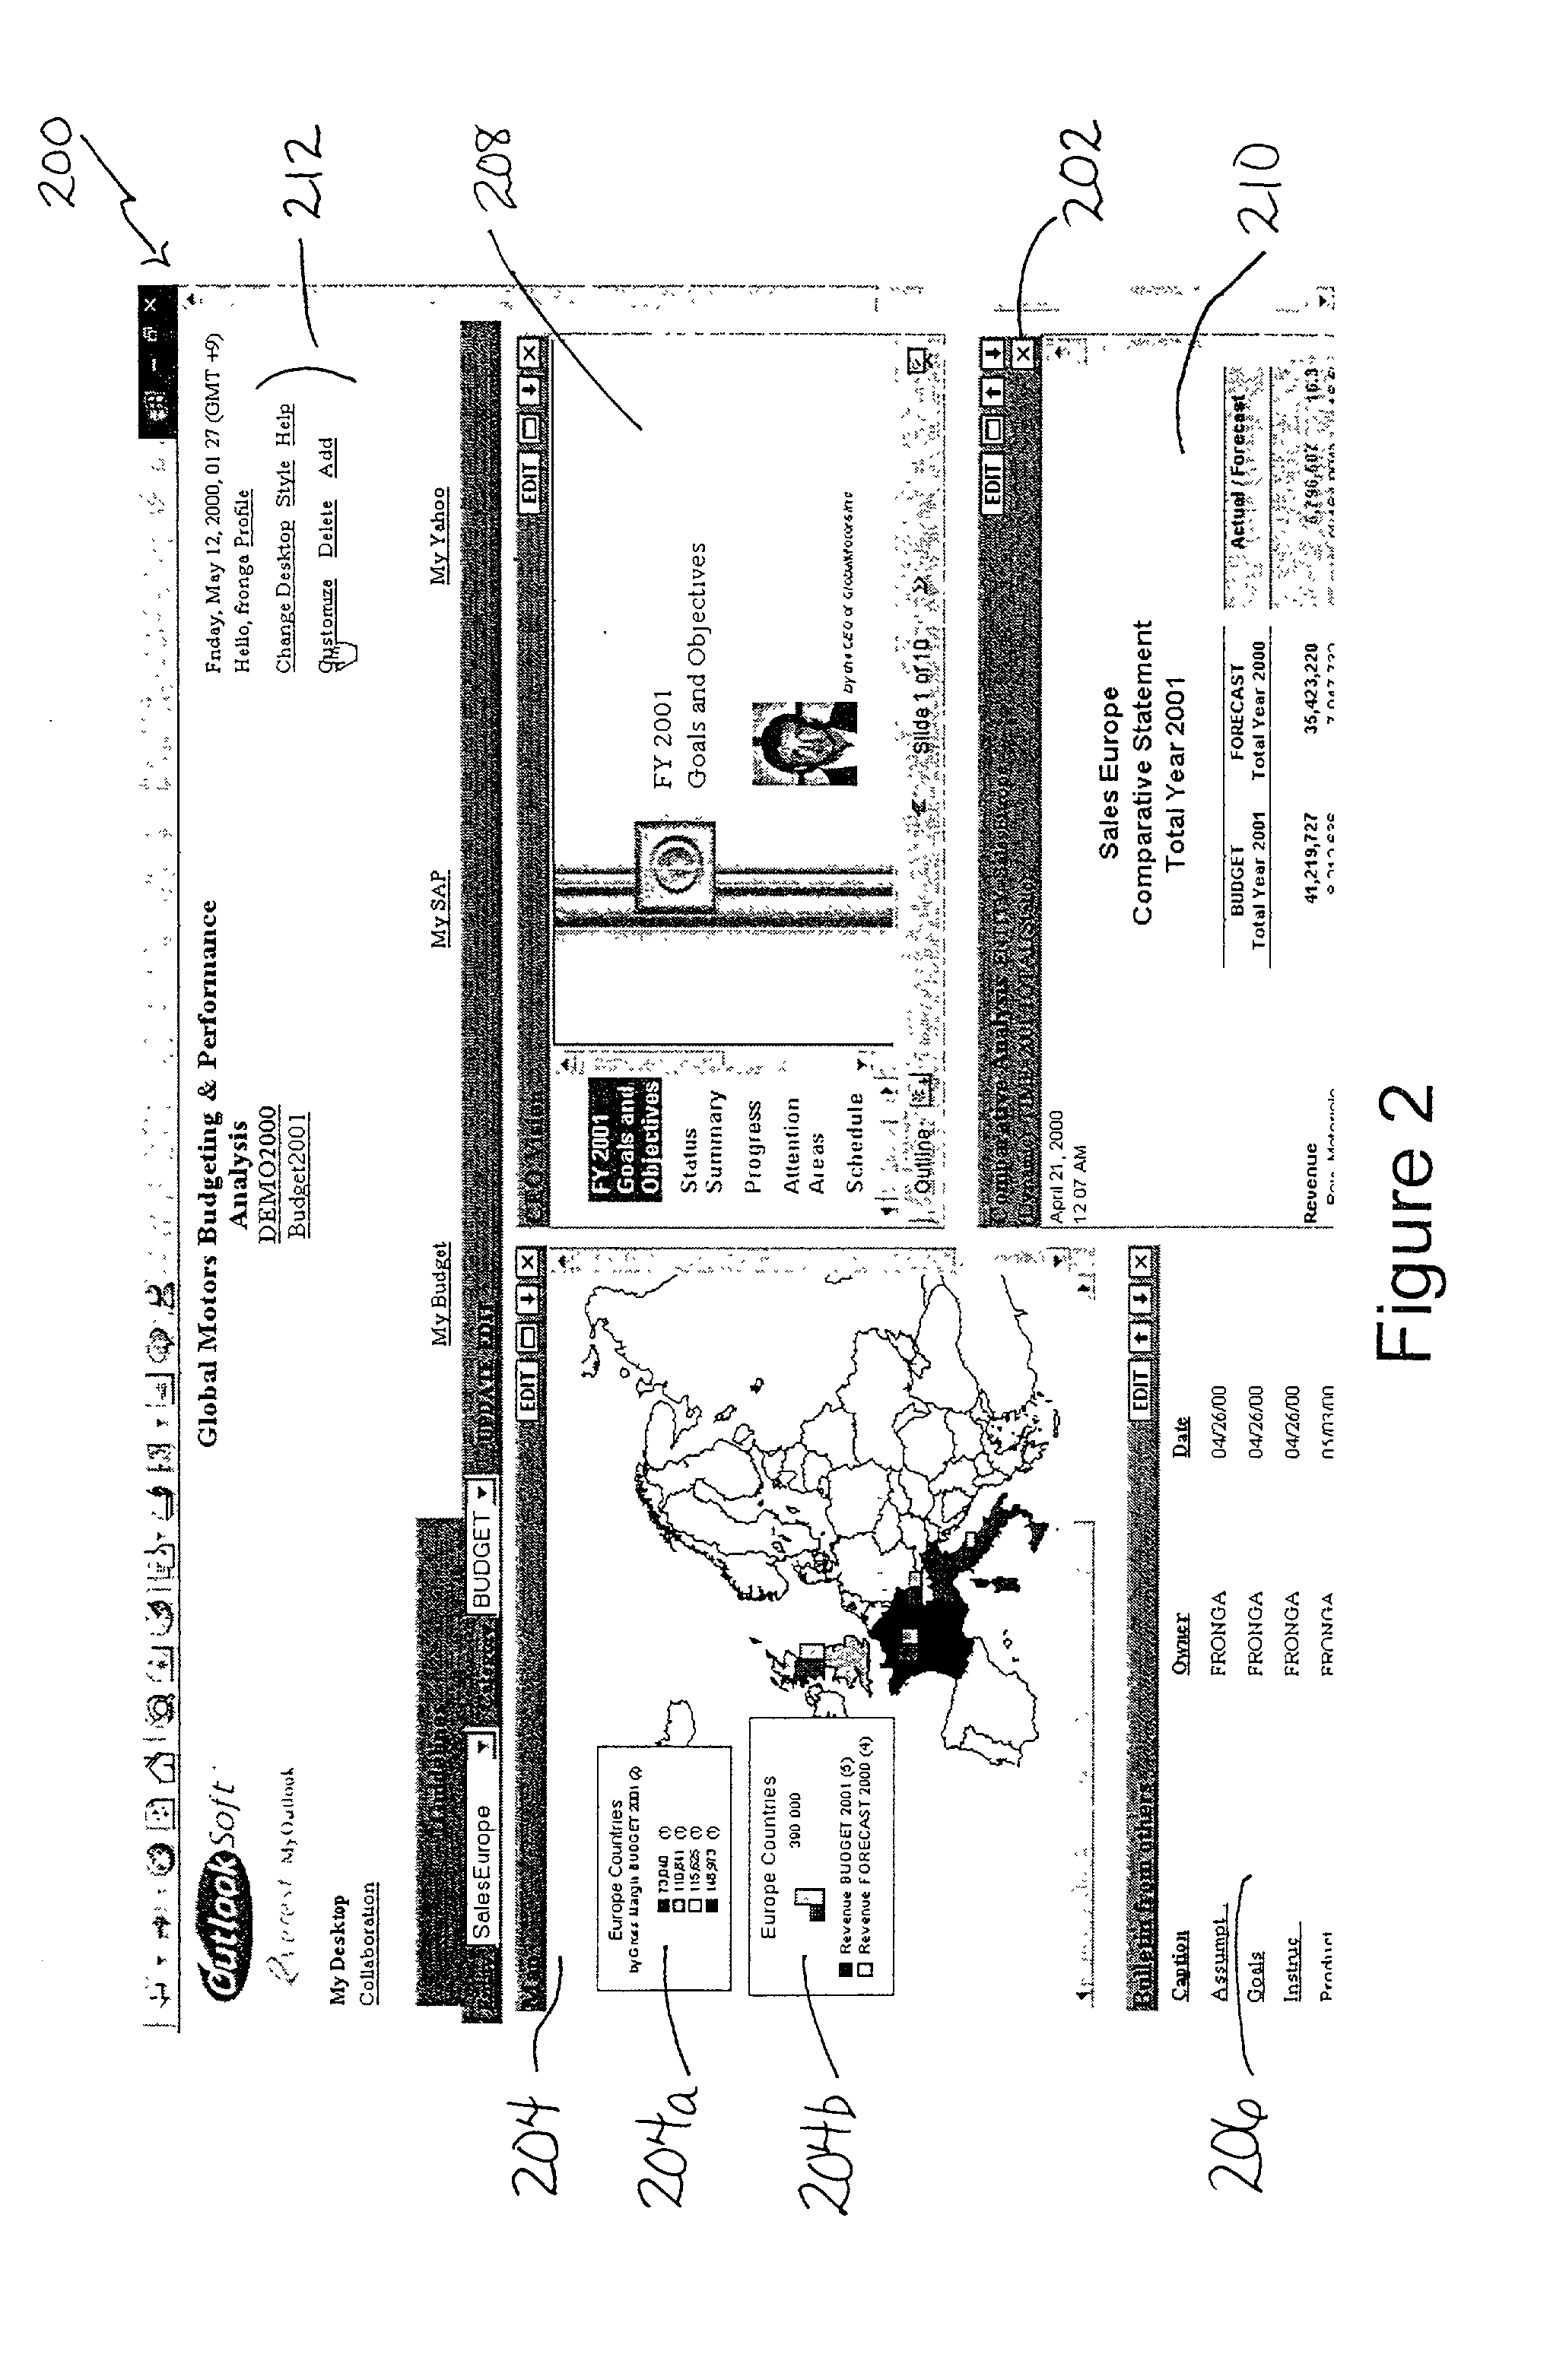 Method and system for facilitating networked information exchange